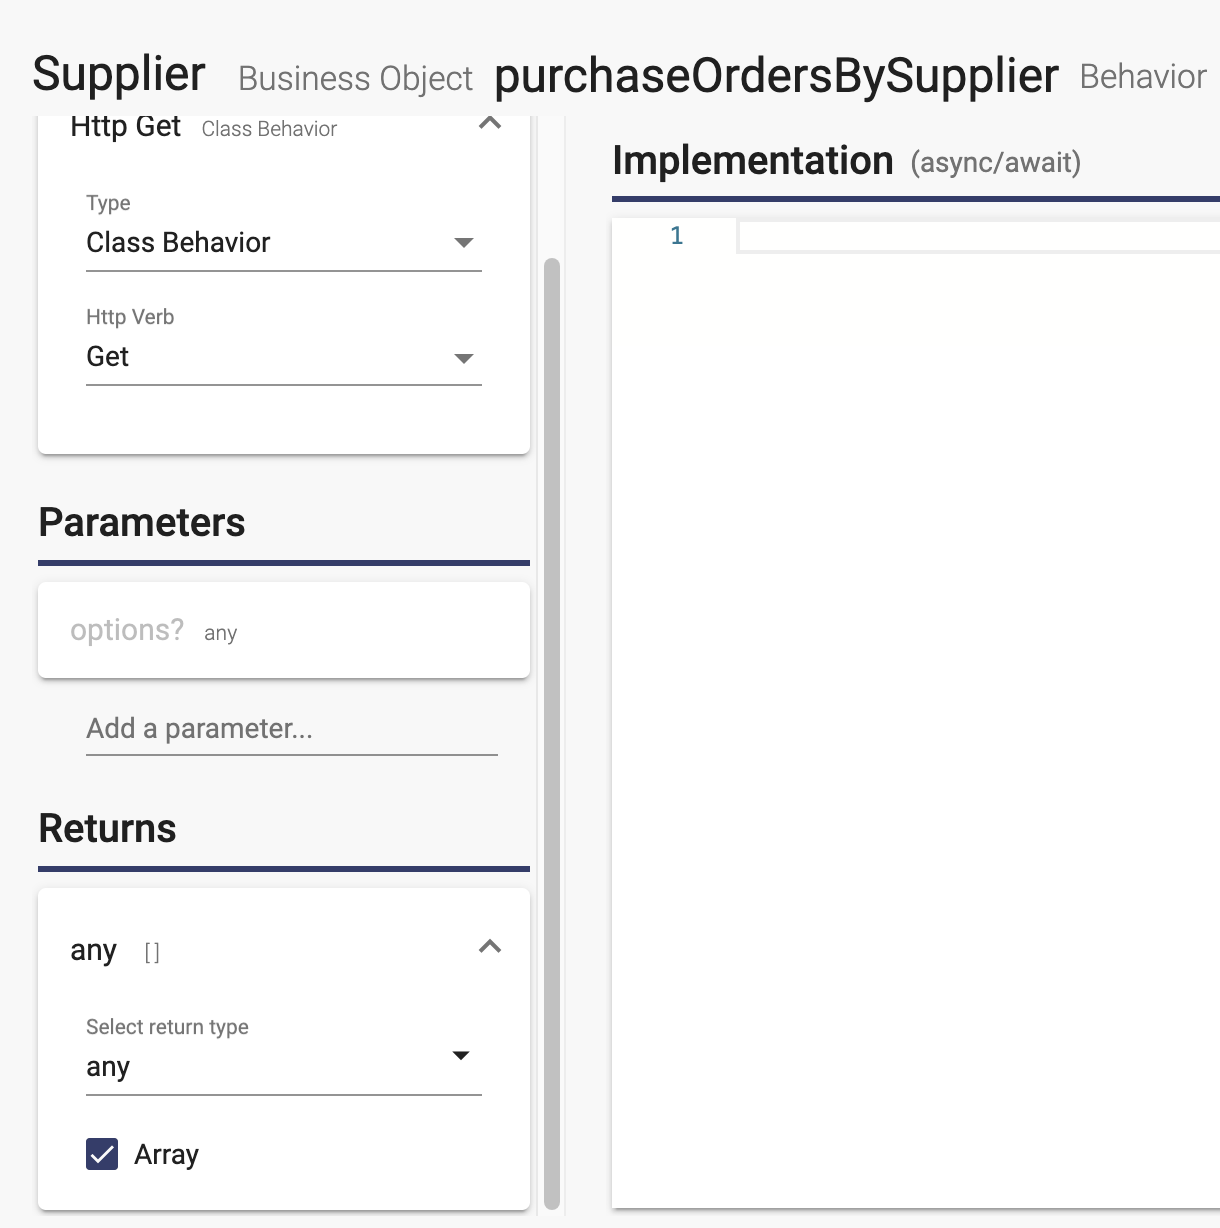 Behavior definition page for the supplier